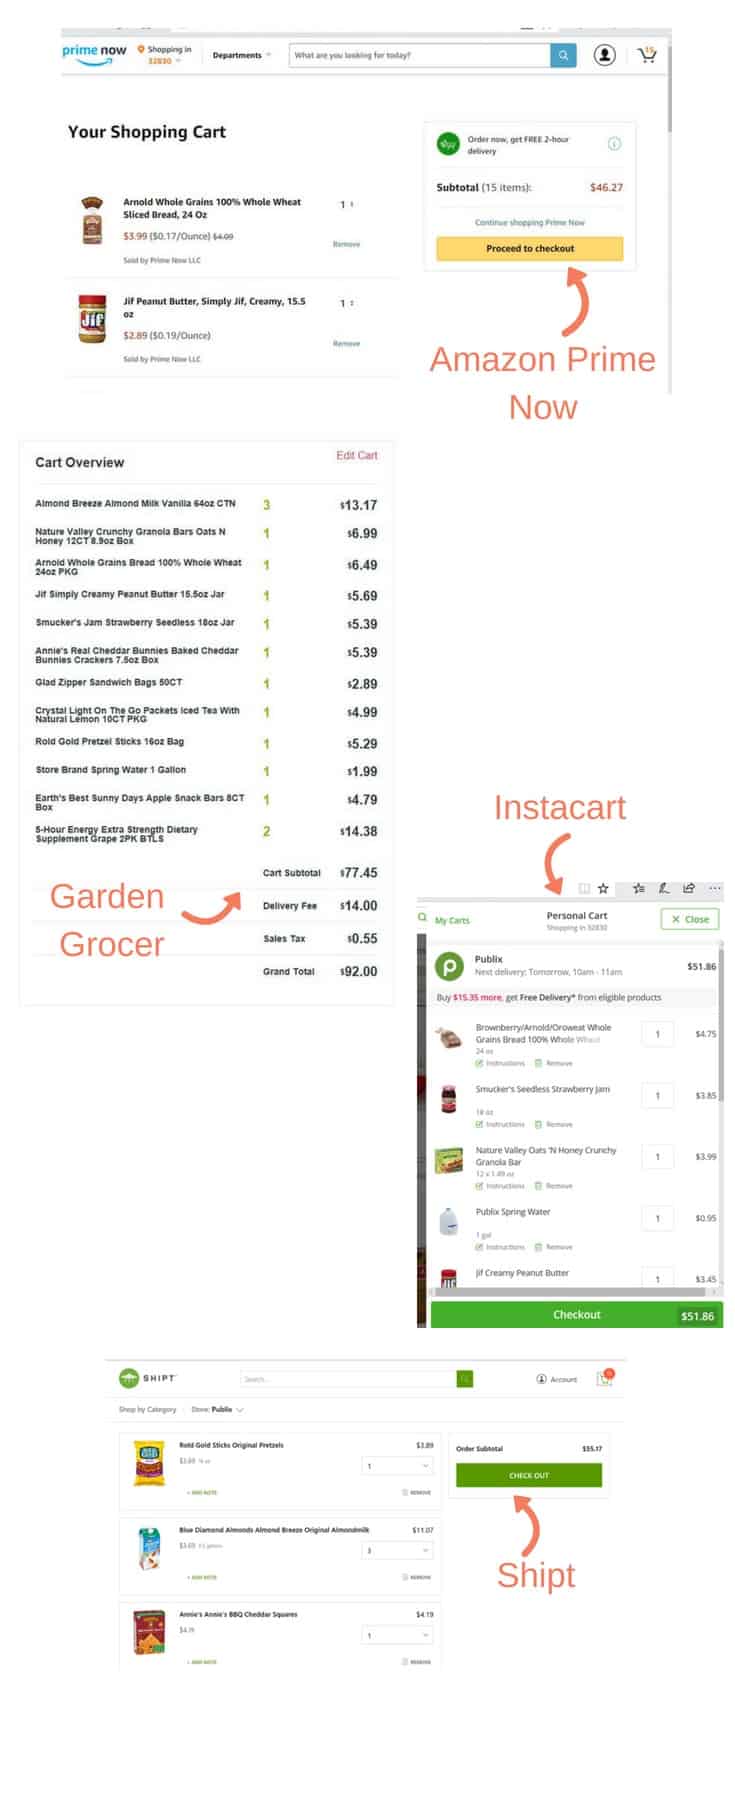 Ordering groceries to your resort at Disney World is one of the easiest ways to save money on a Disney World vacation! Learn all the options available to you to order food to your room and the pros and cons to each option! Including Amazon Prime Now, Garden Grocer, Instacart, WeGoShip, and Shipt! Tons of tips!